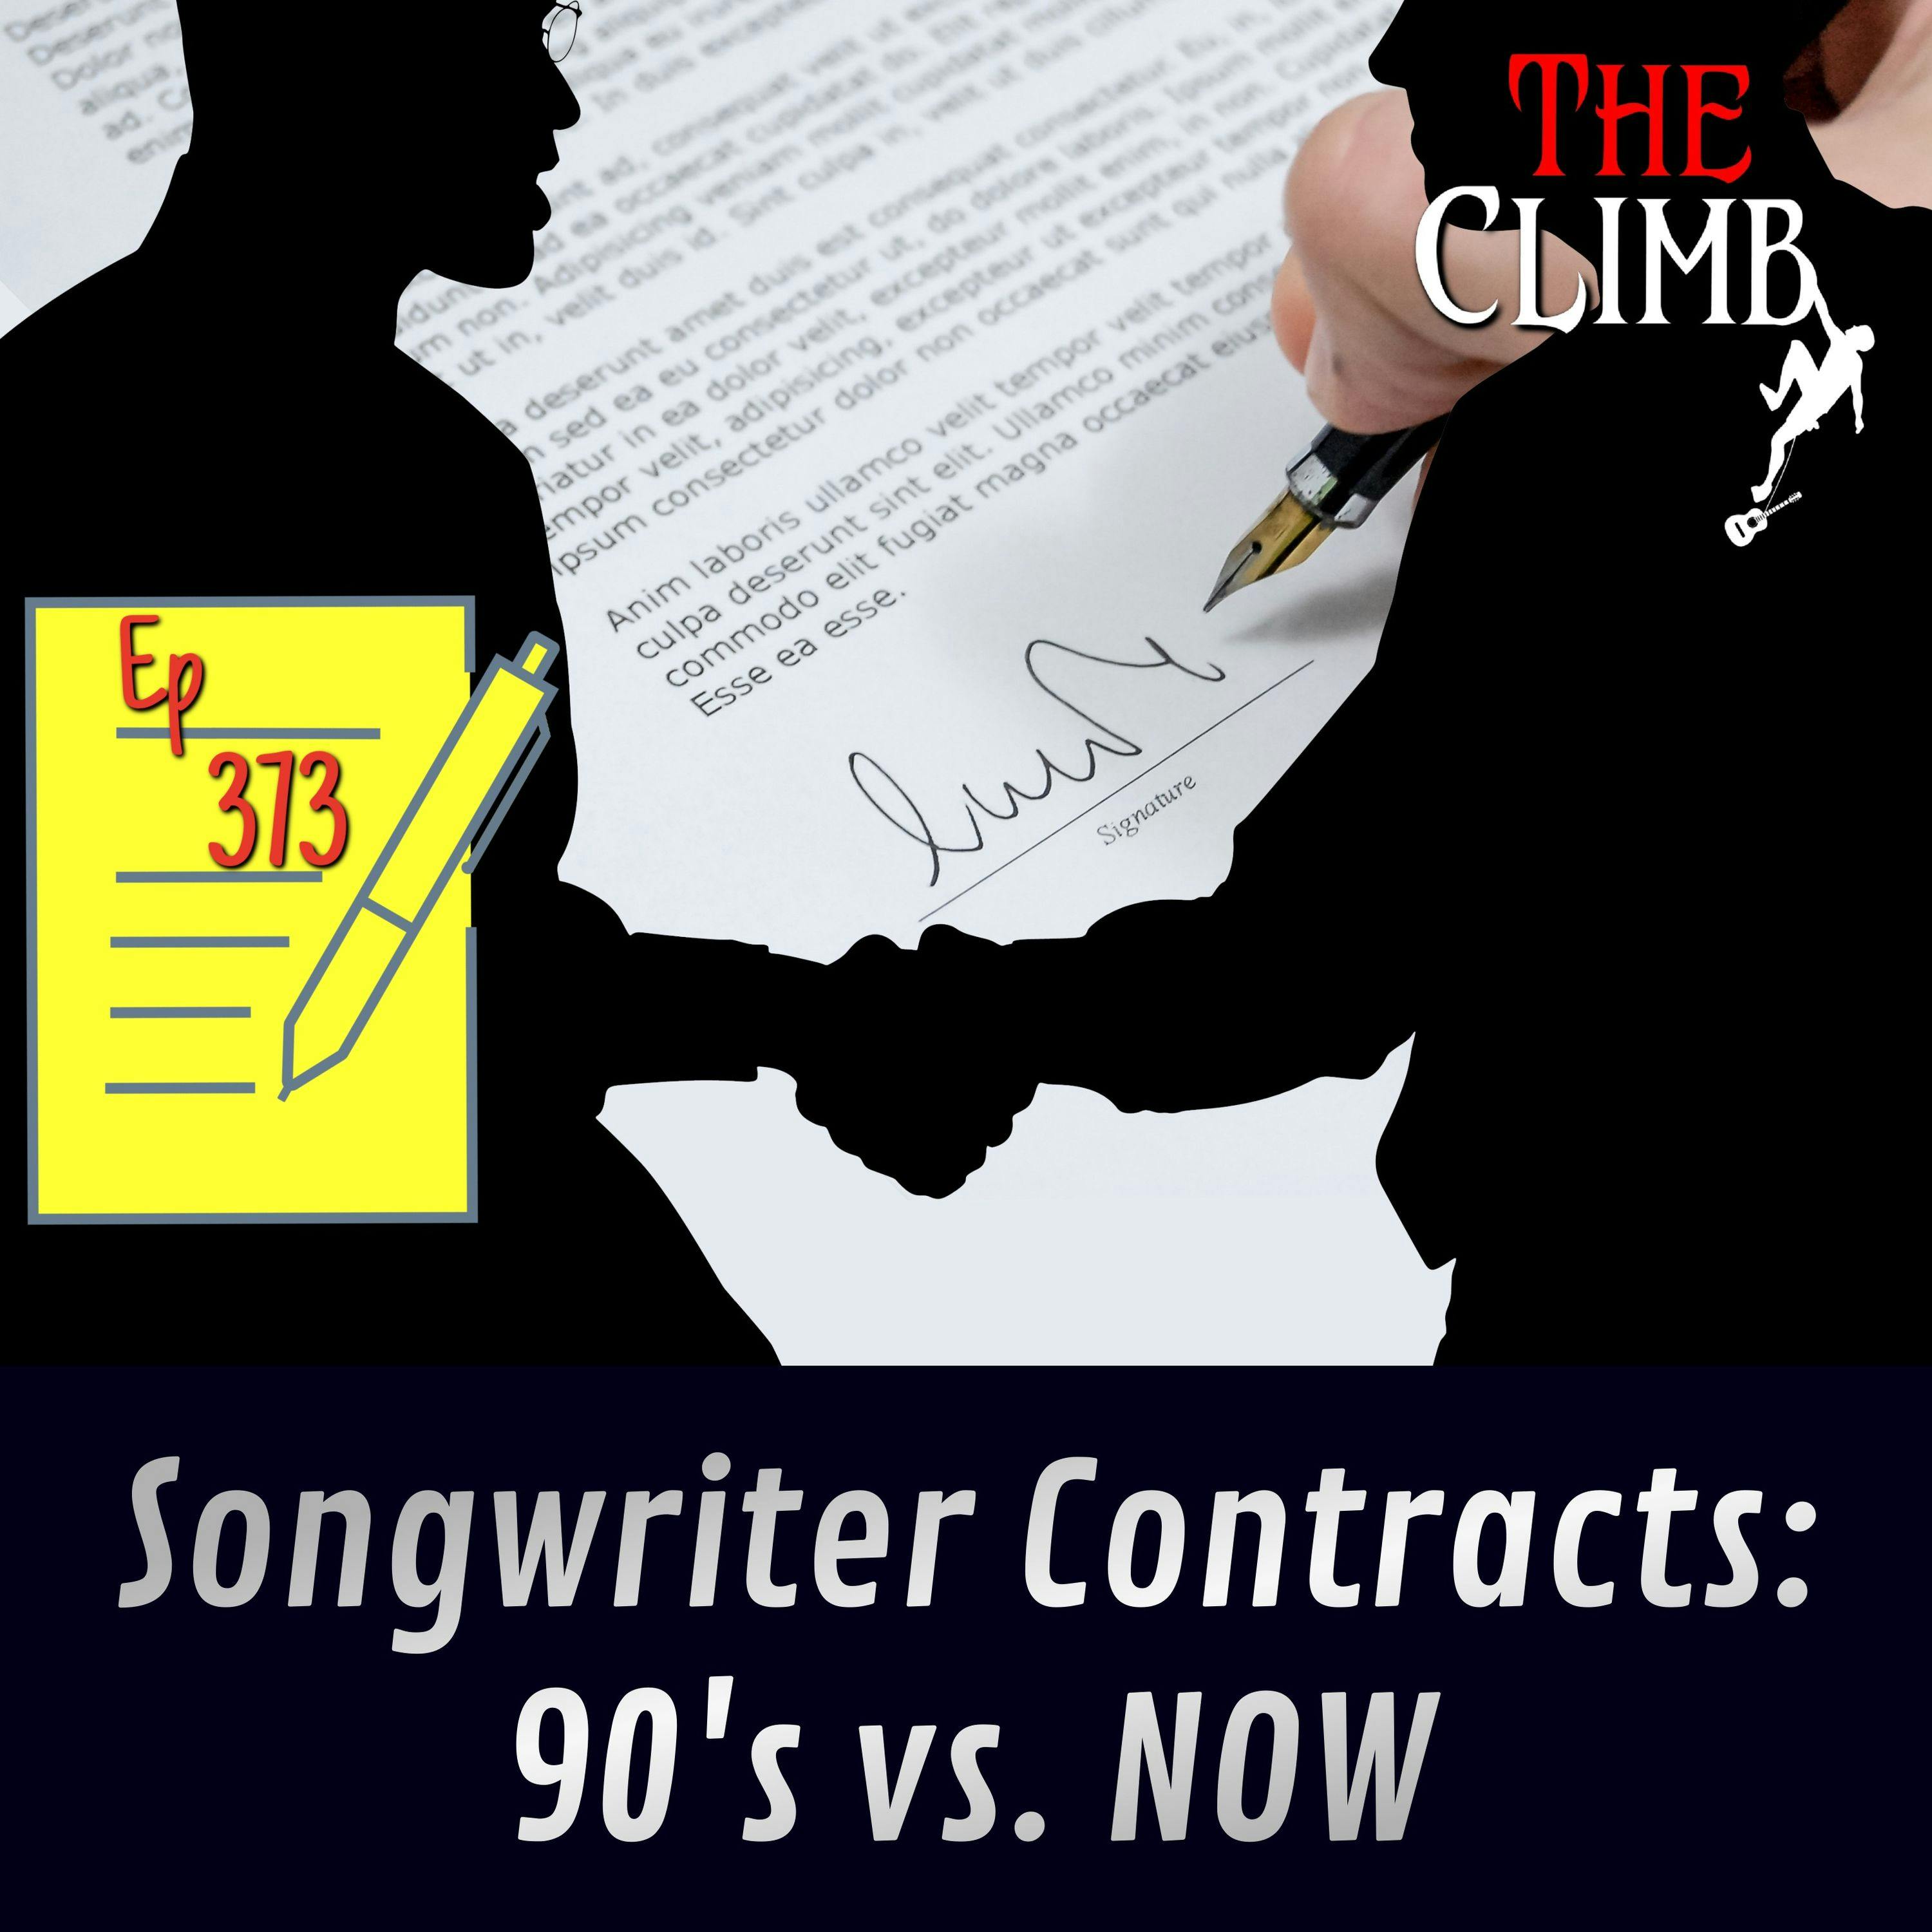 Ep 373: Songwriter Contracts: 90’s vs. Now